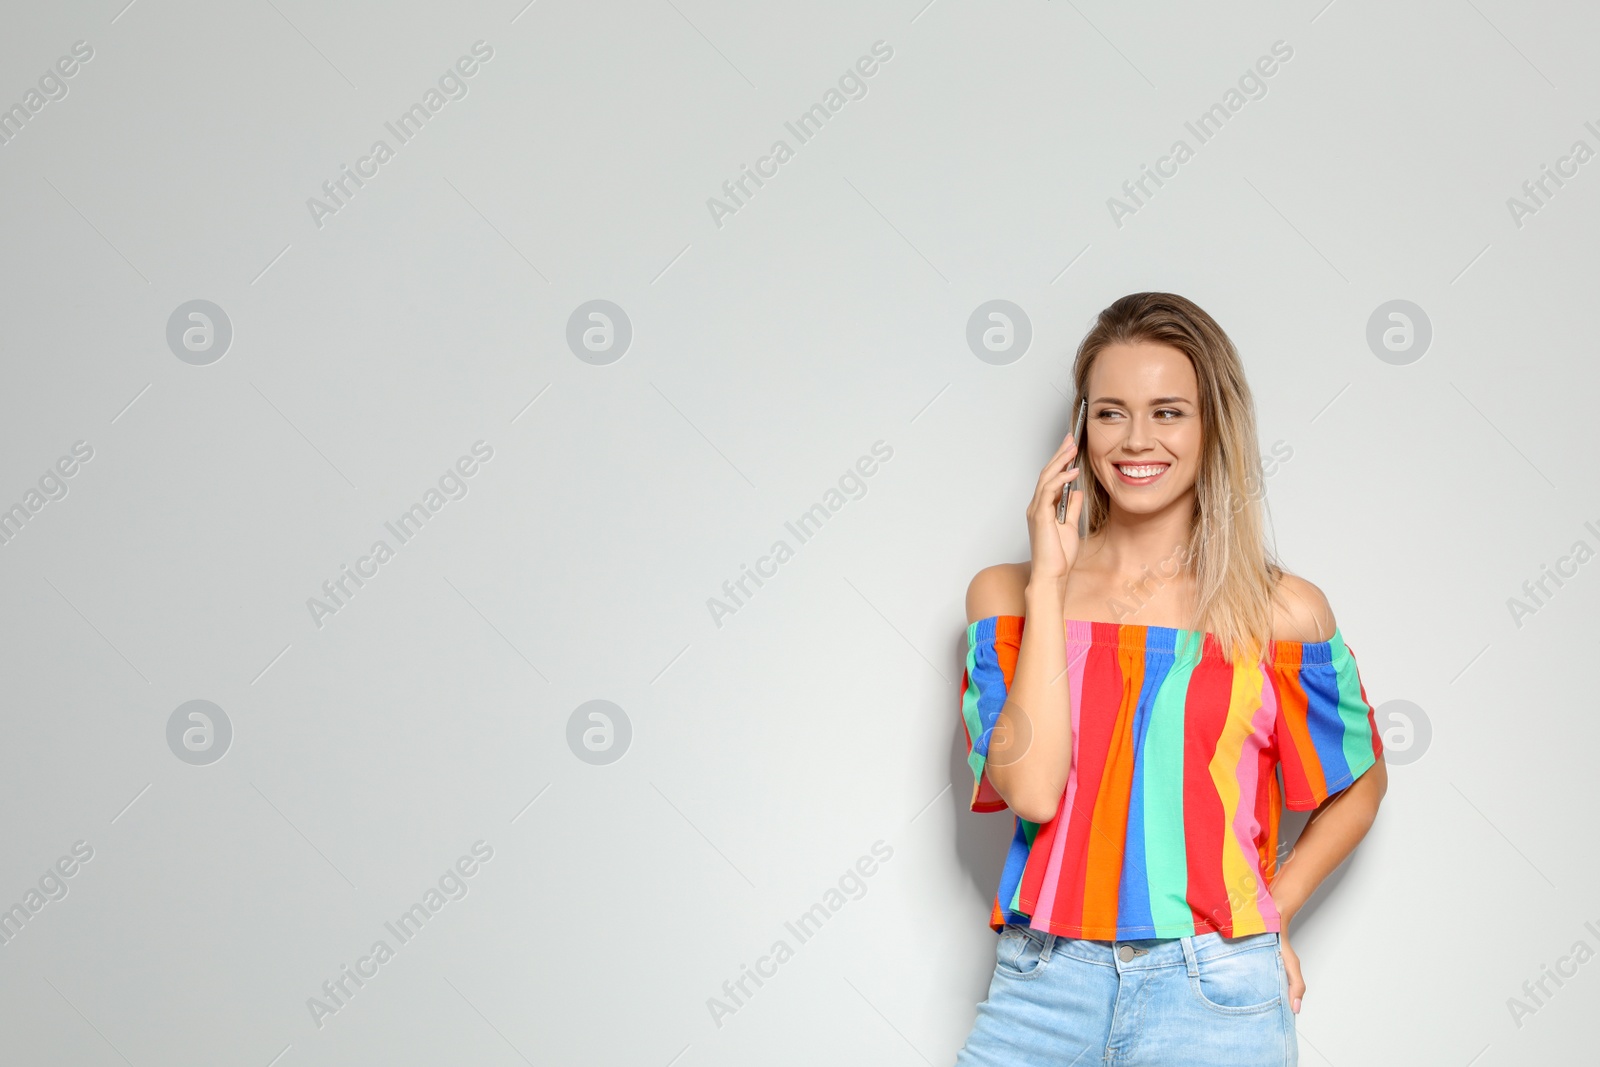 Photo of Beautiful woman talking on phone against light background